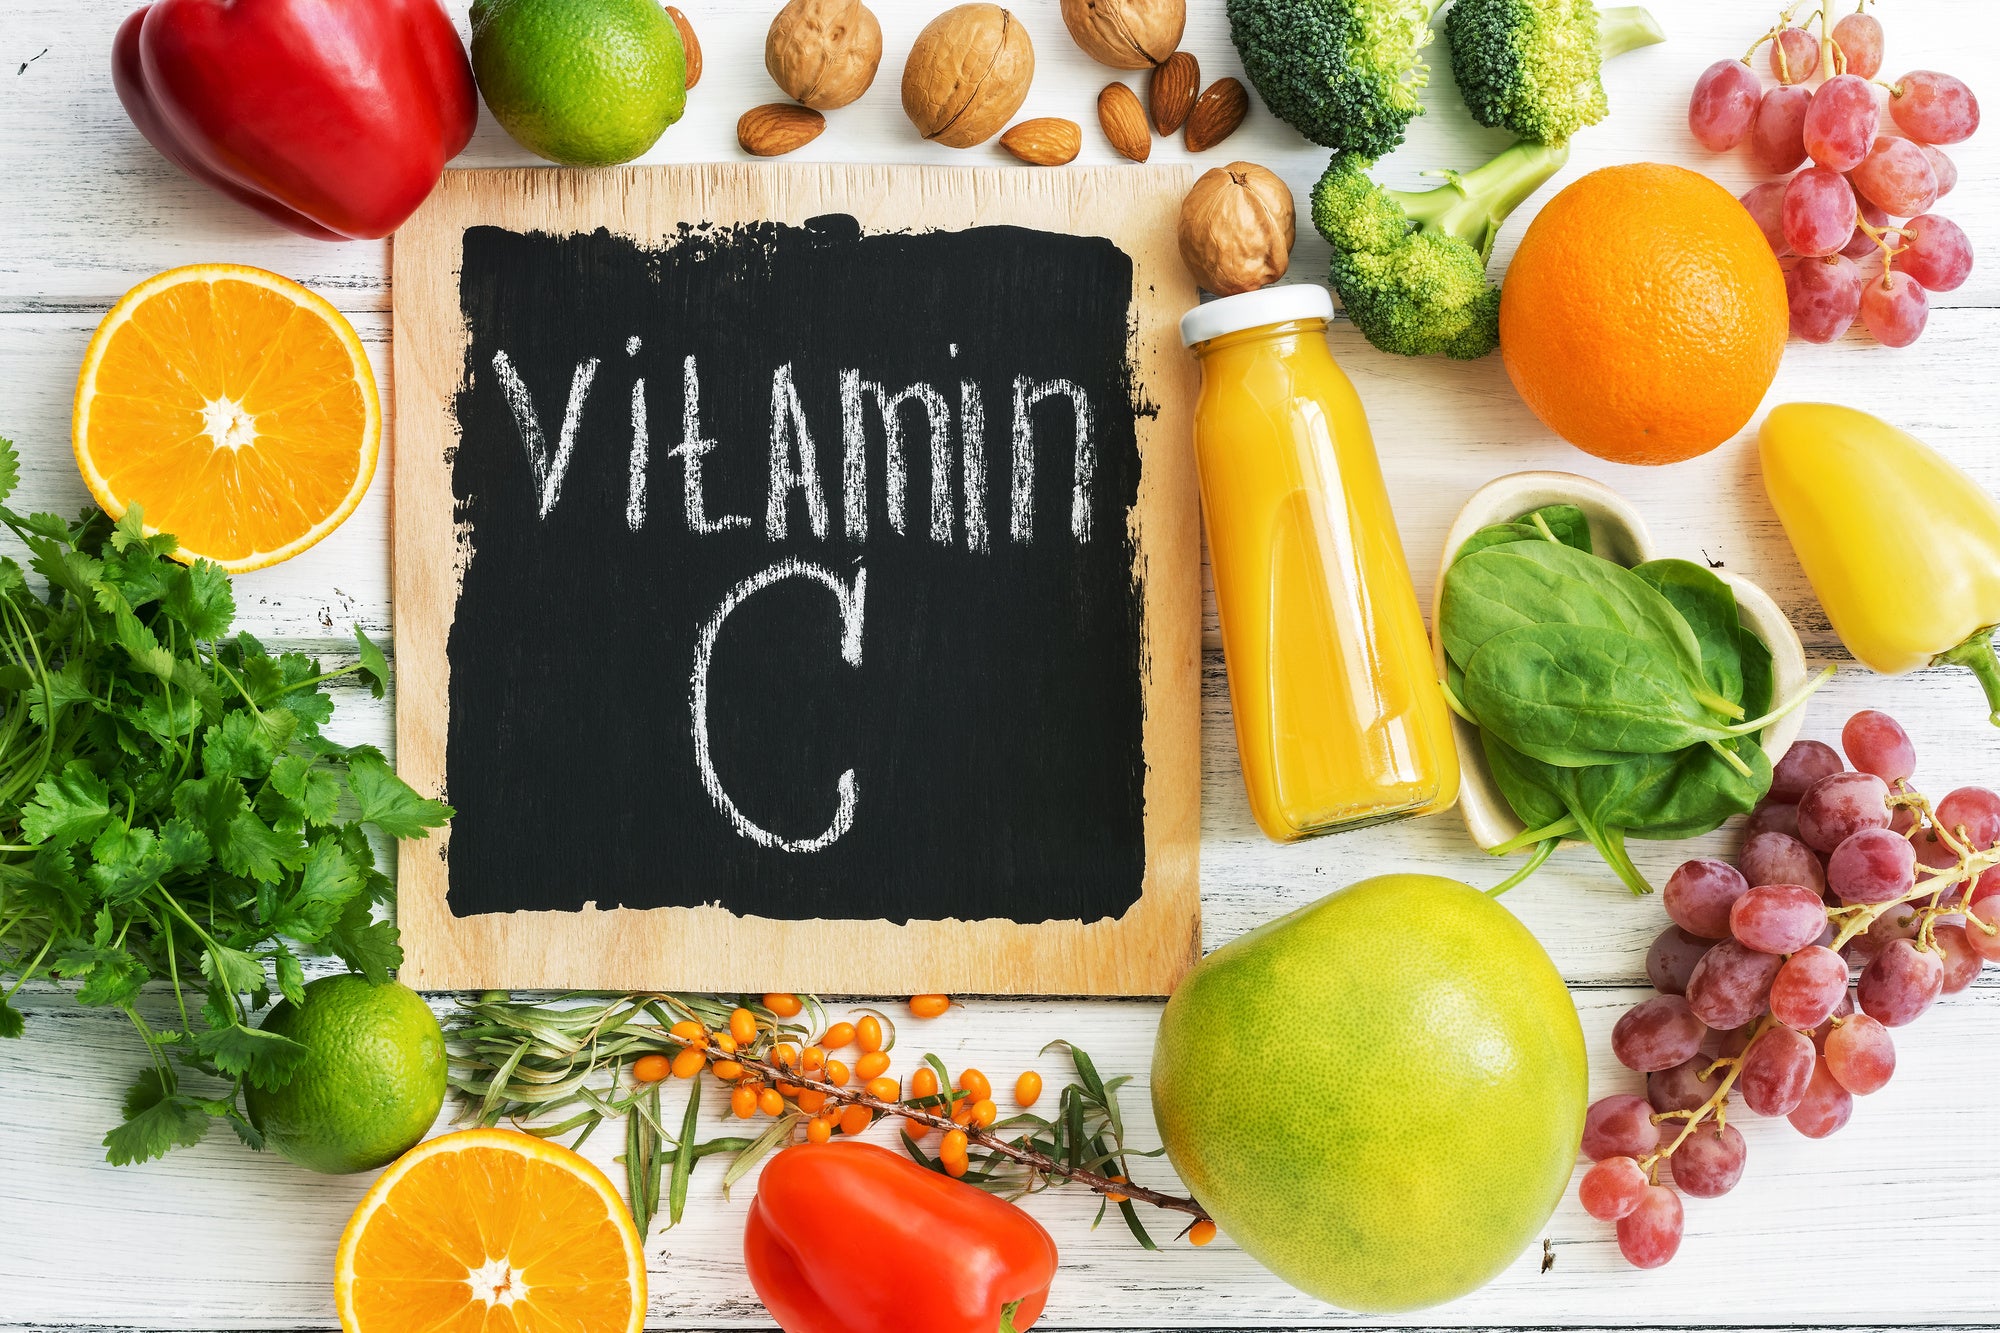 Retinol and Vitamin C: How to Use Them Together